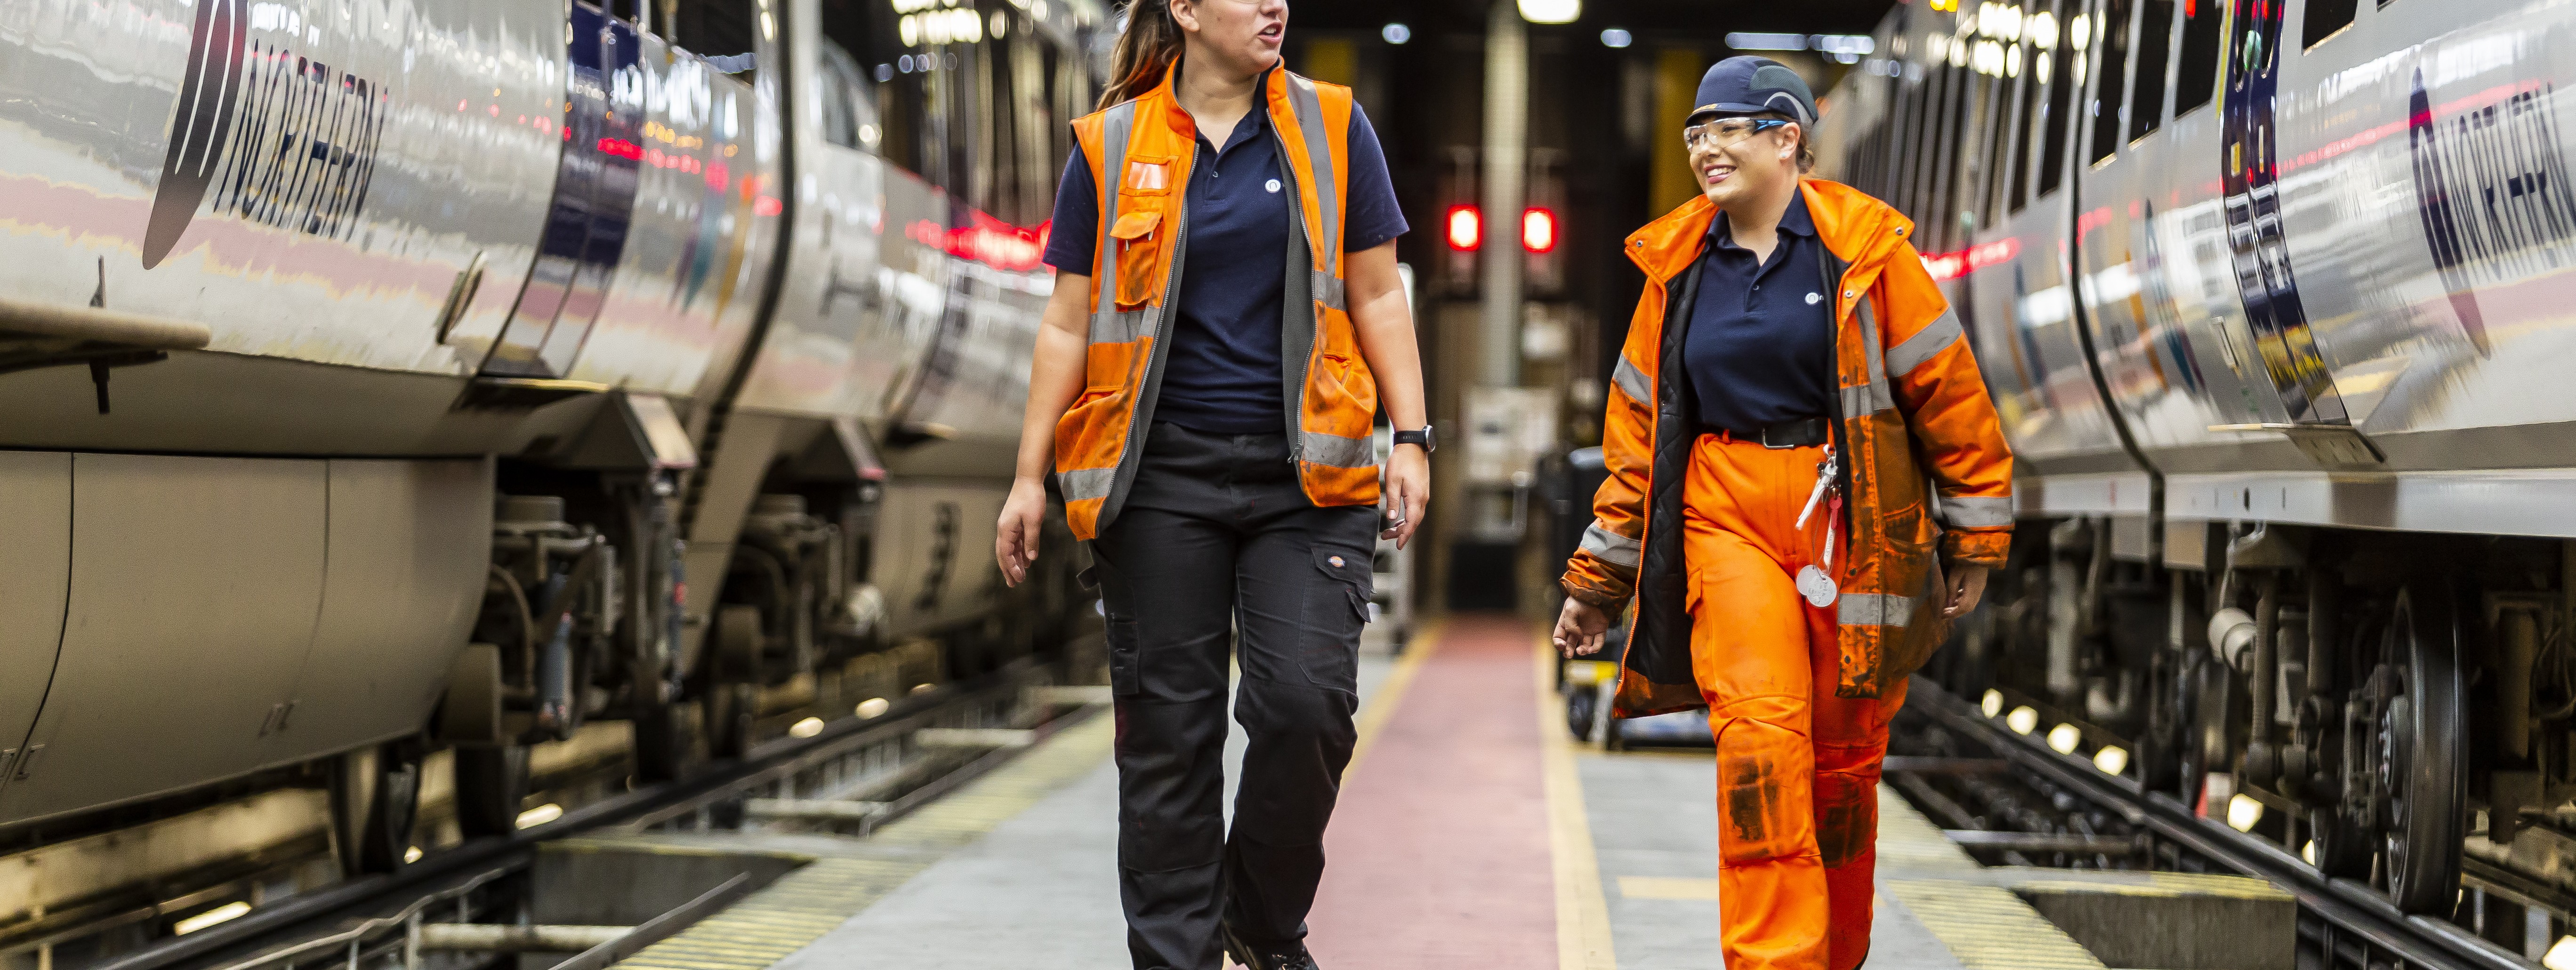 this-image-shows-kate-towns-l-with-a-colleague-at-neville-hill-depot